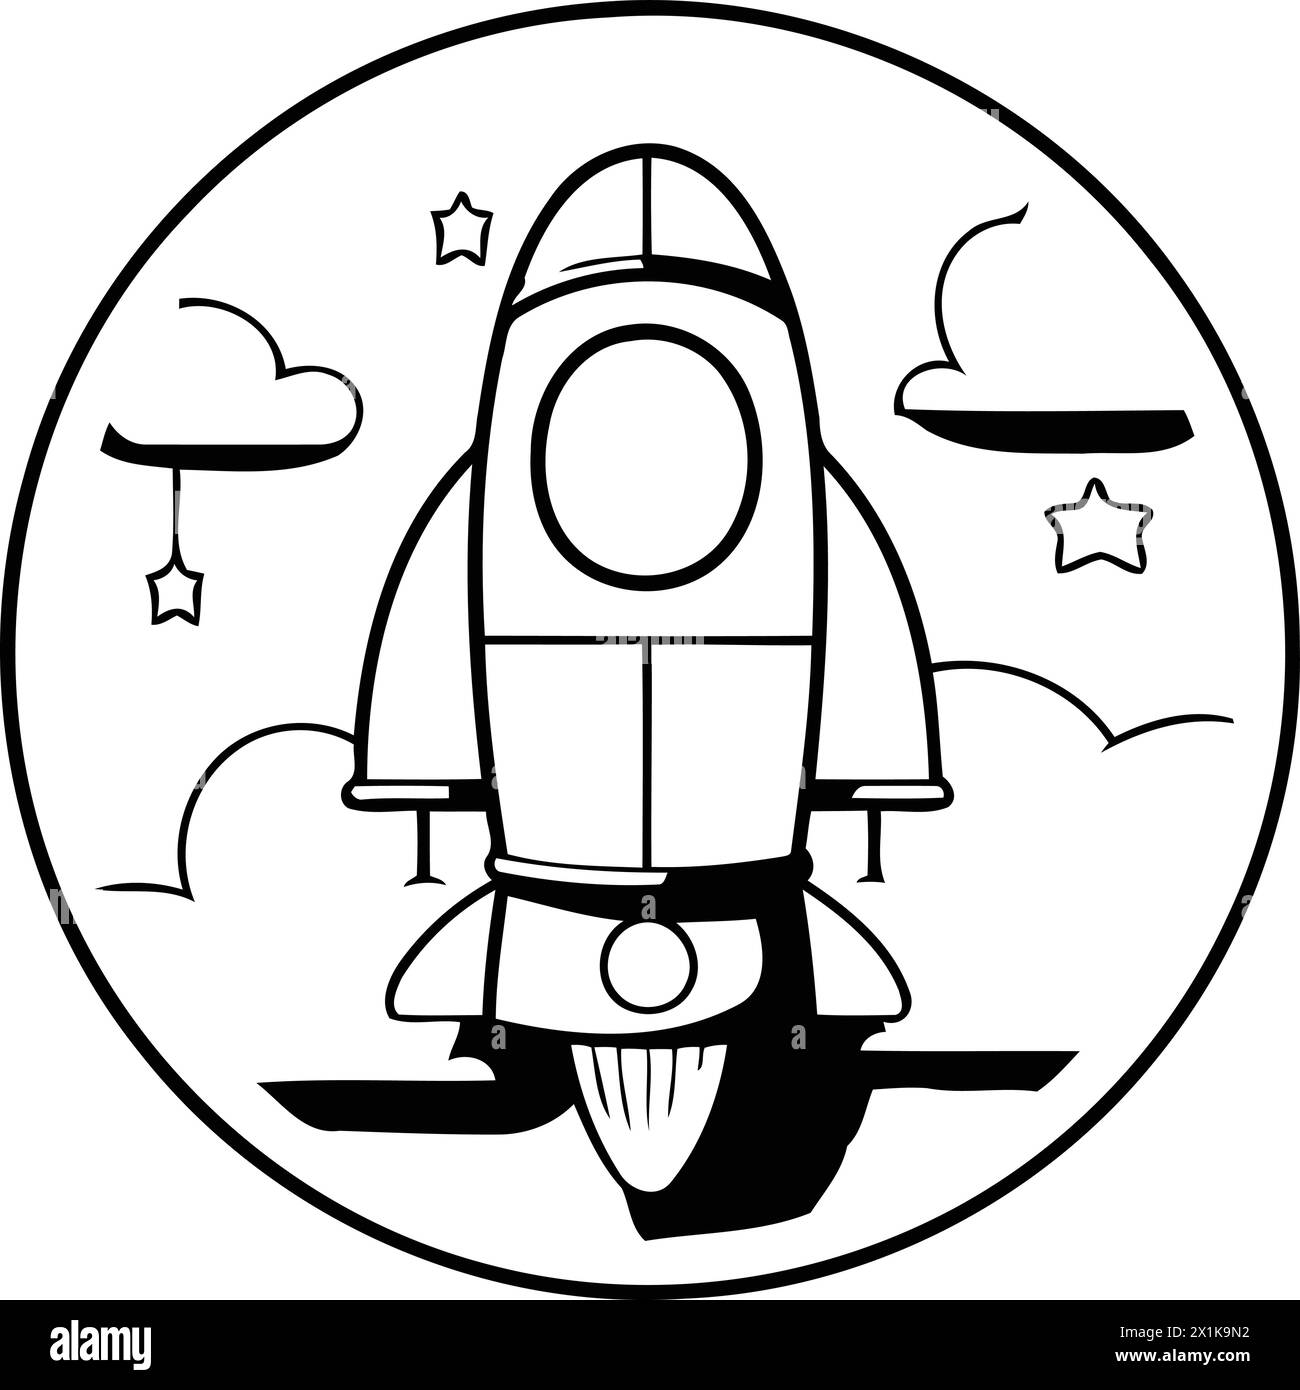 Space rocket icon. Vector illustration in flat style. Space travel concept. Stock Vector